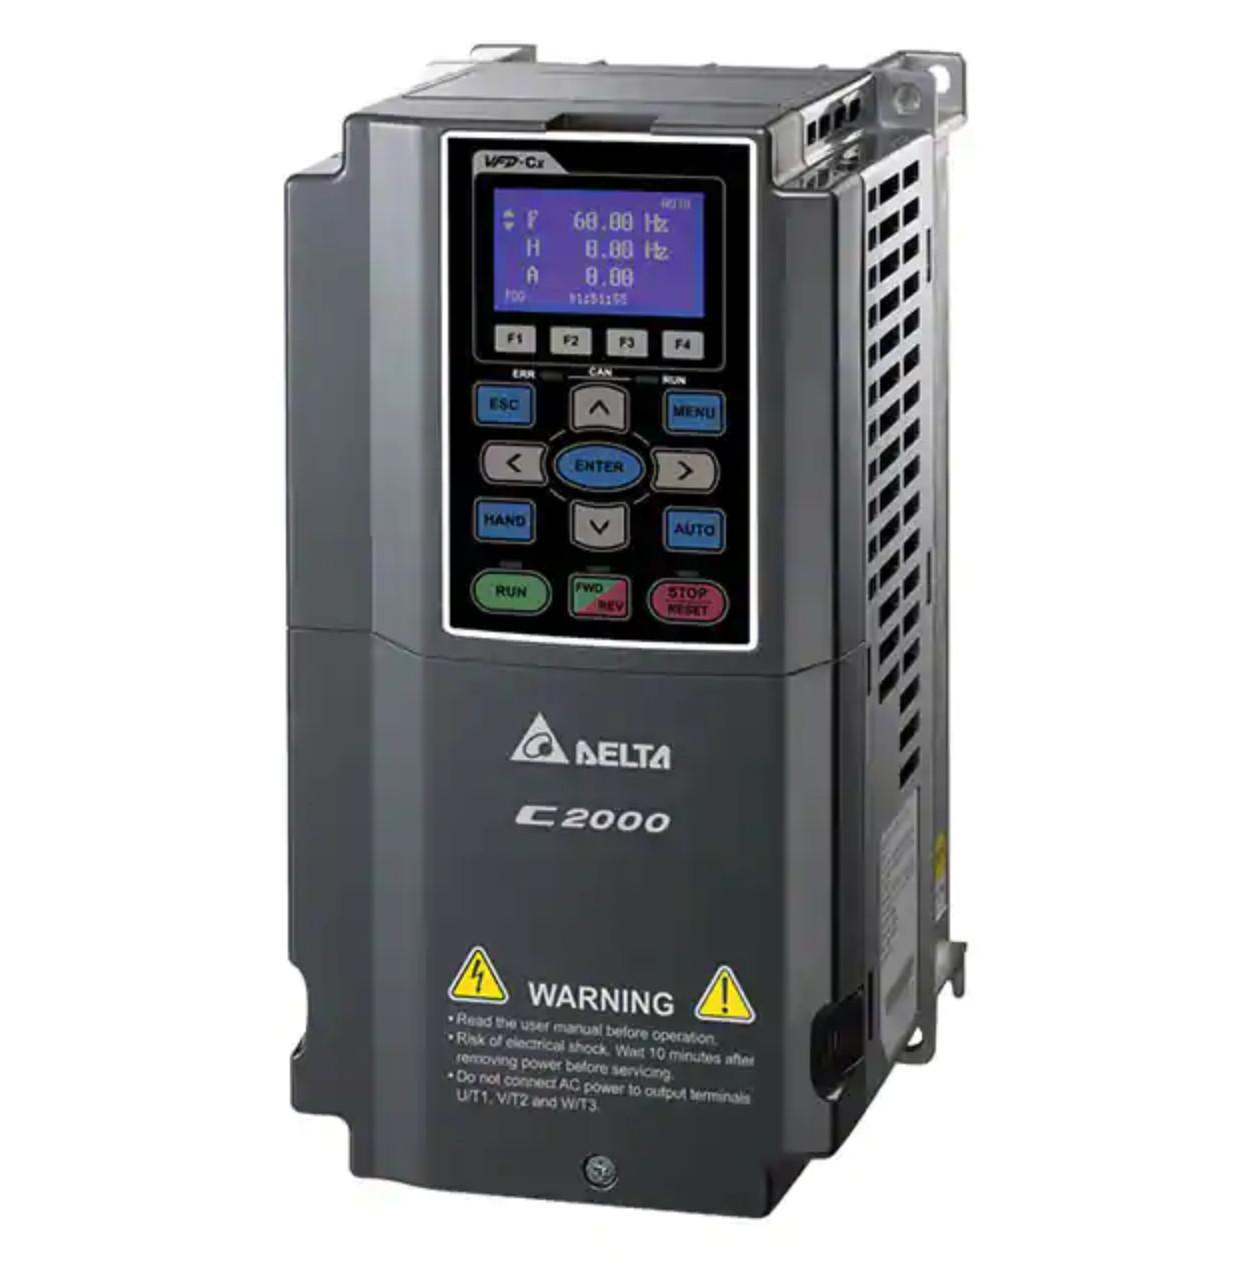 Delta VFD015C4EA-21 Variable Frequency Drive, 3 phase, 460 VAC build-in EMI Input, 2 HP, frame A, wall mount, IP20, NEMA 1